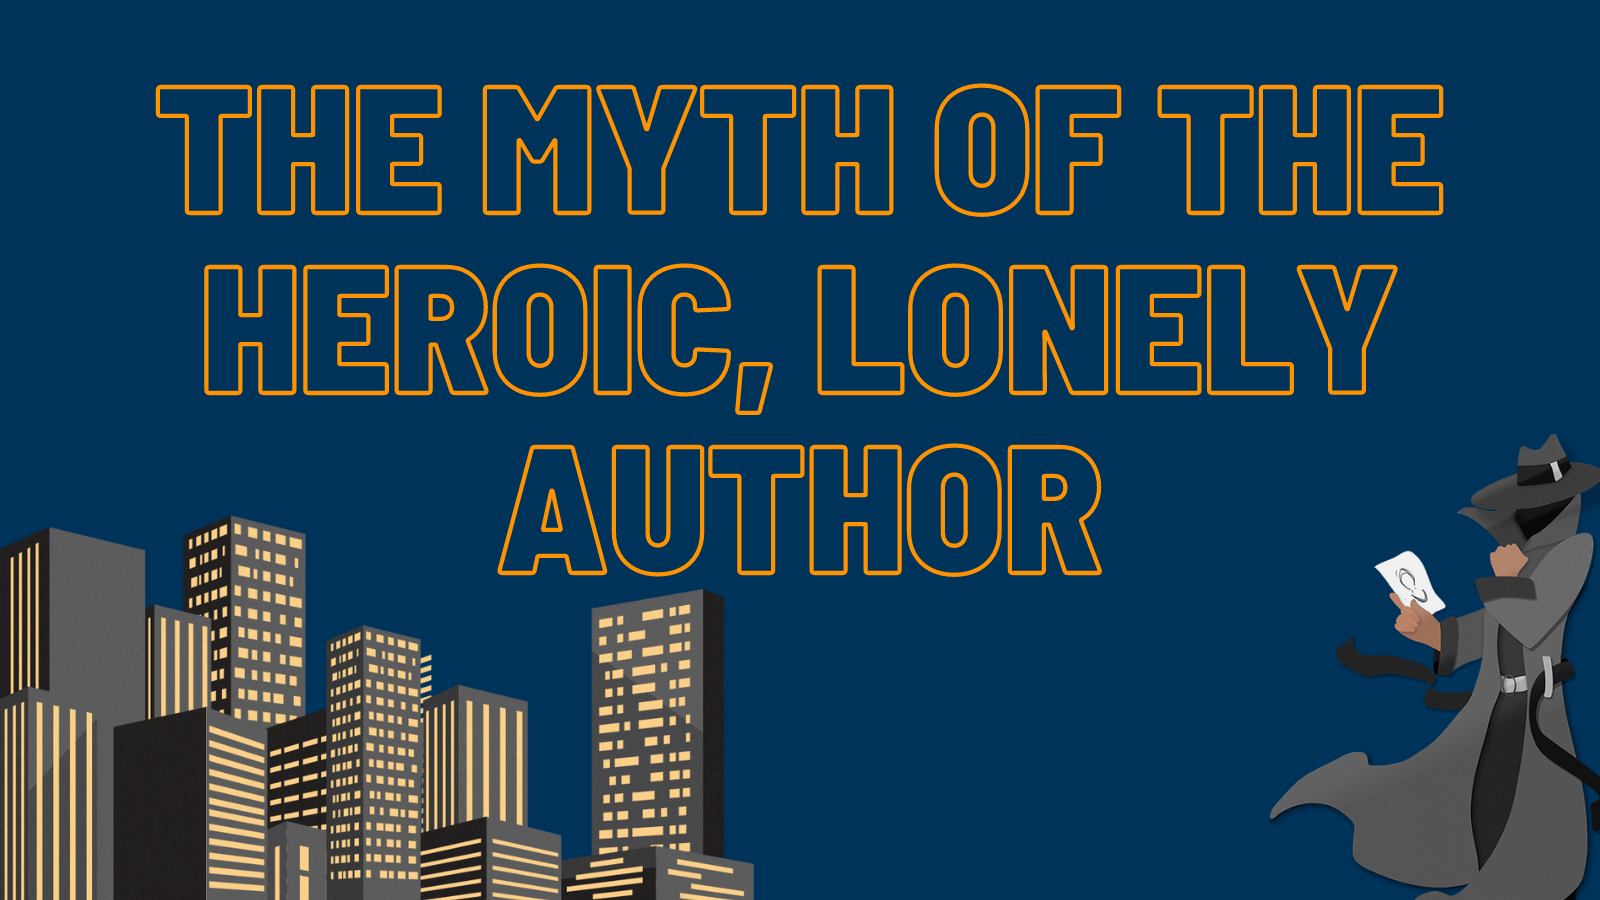 "The Myth of the Heroic, Lonely Author"